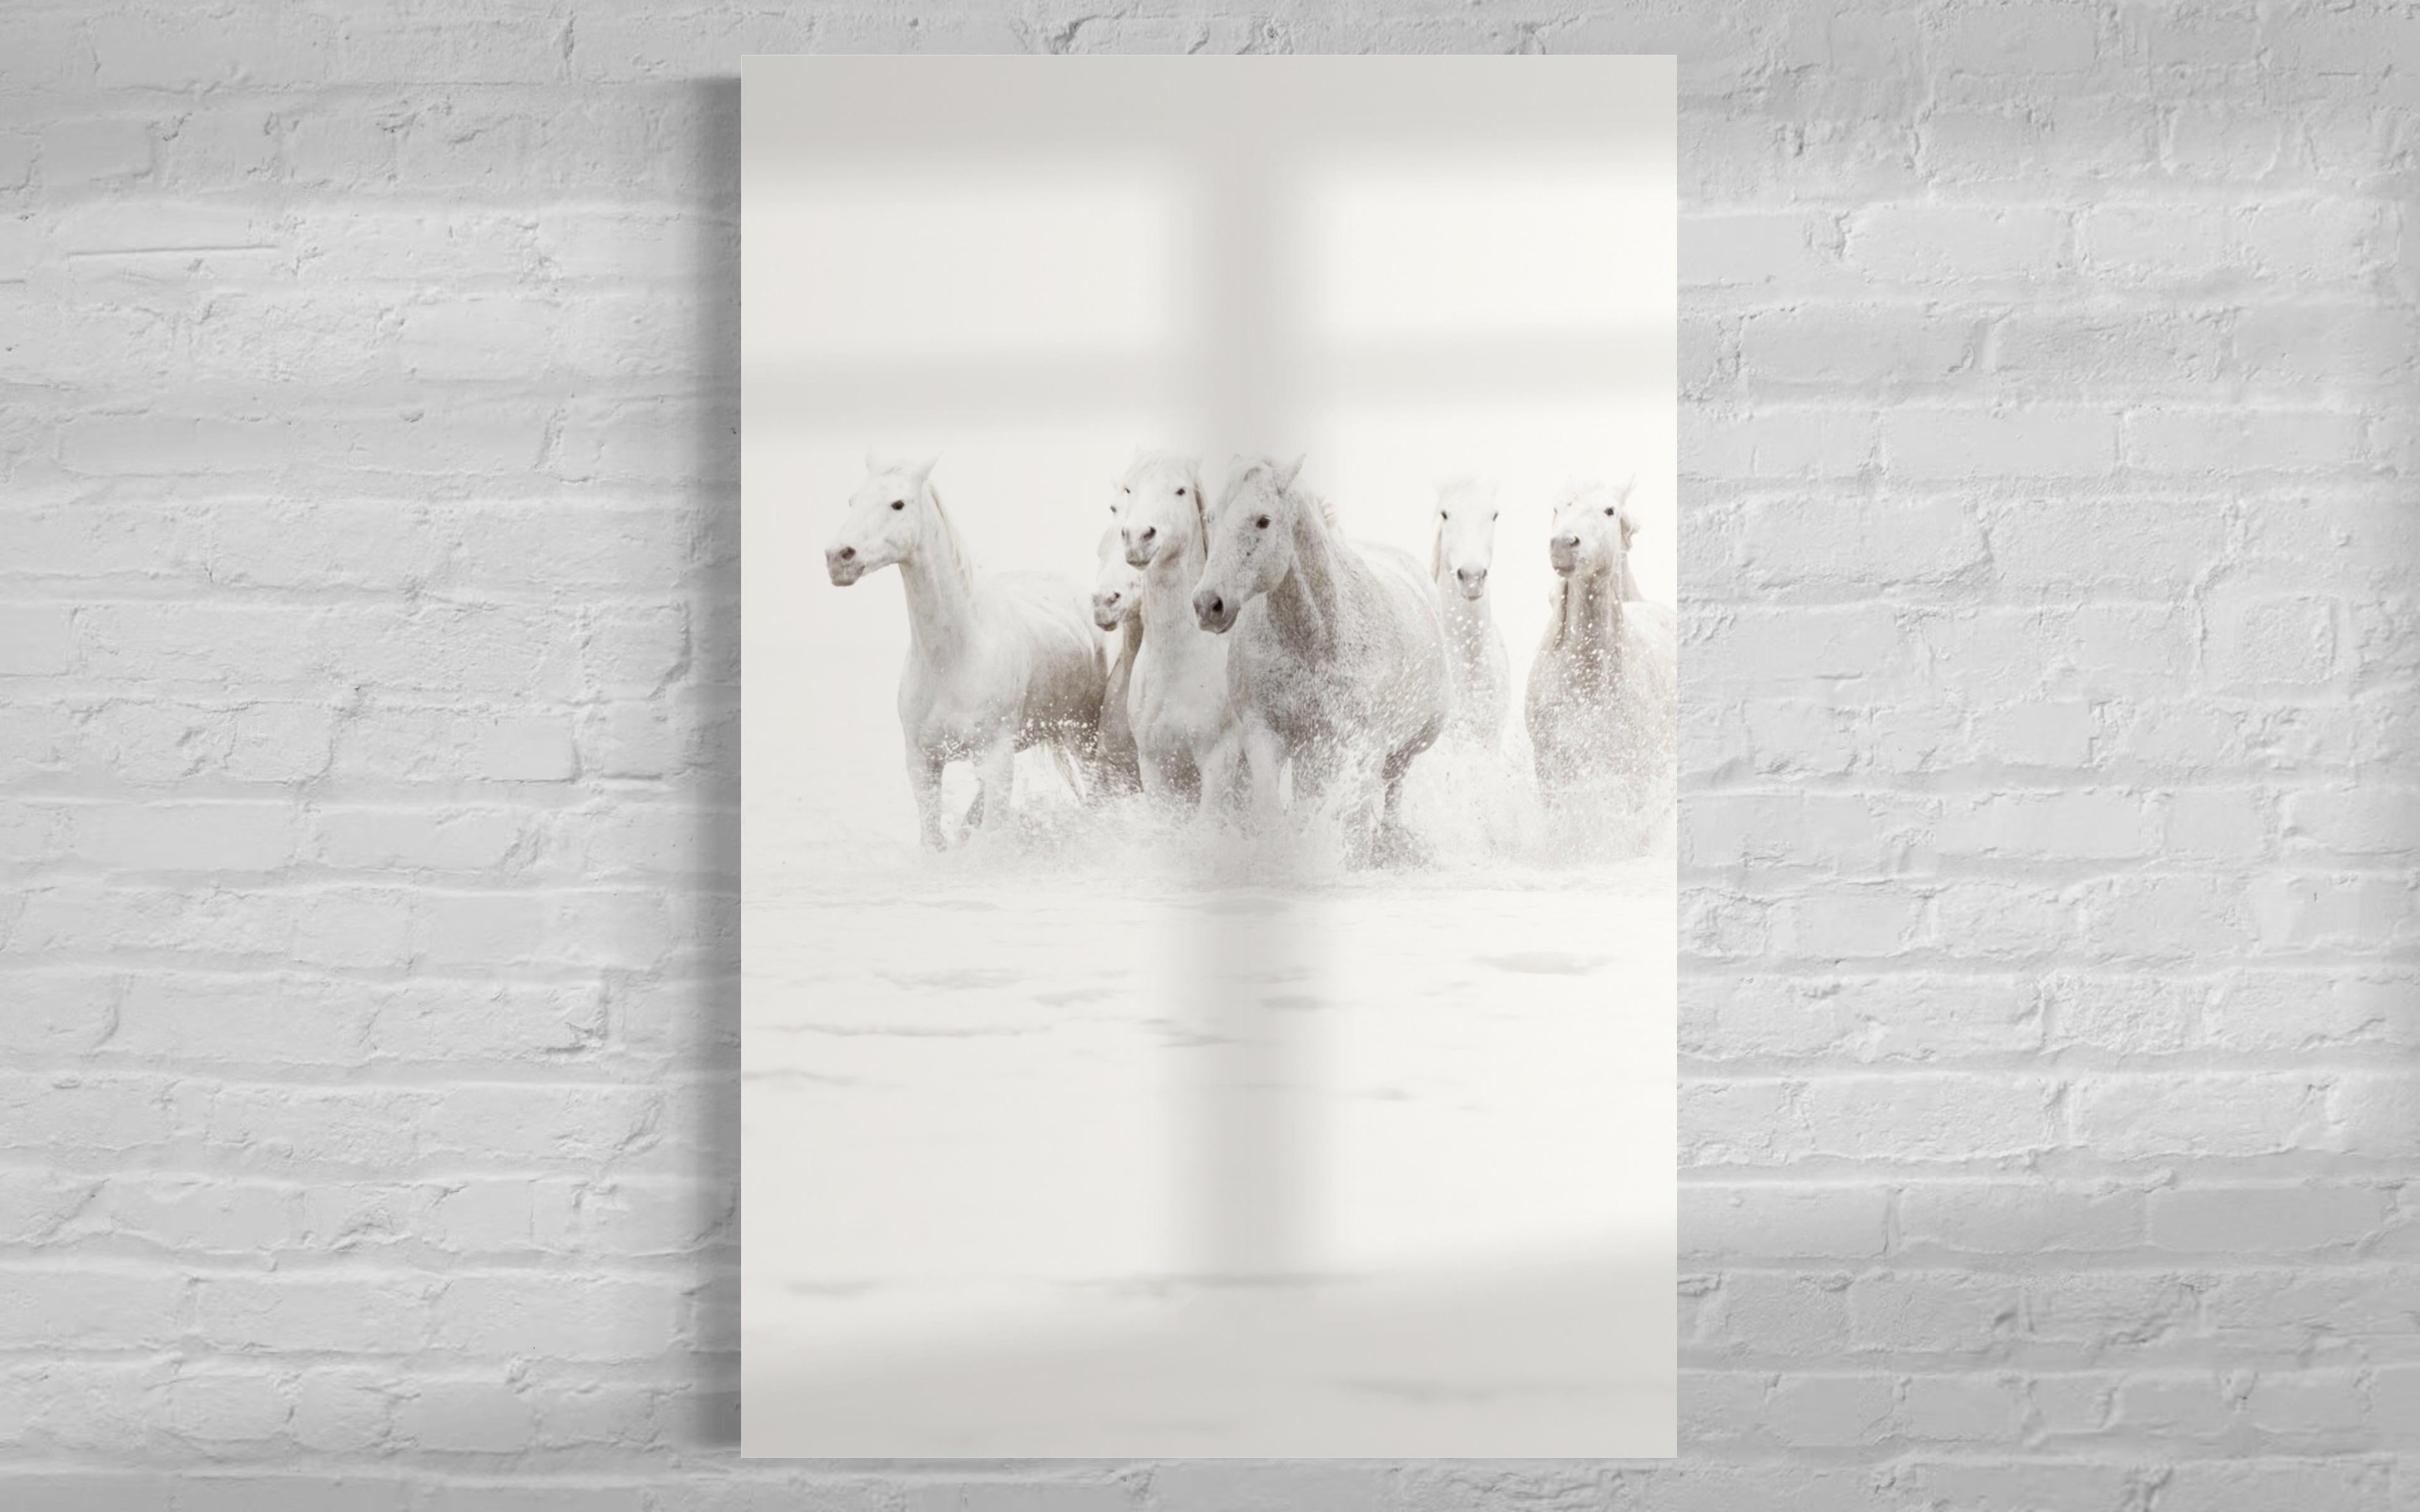 This contemporary black and white photograph by Tori Gagne captures a band of white horses running through water. An edition size of 50, this photograph is available as a metal sublimation print with a 1.3” deep silver flush mount frame and white